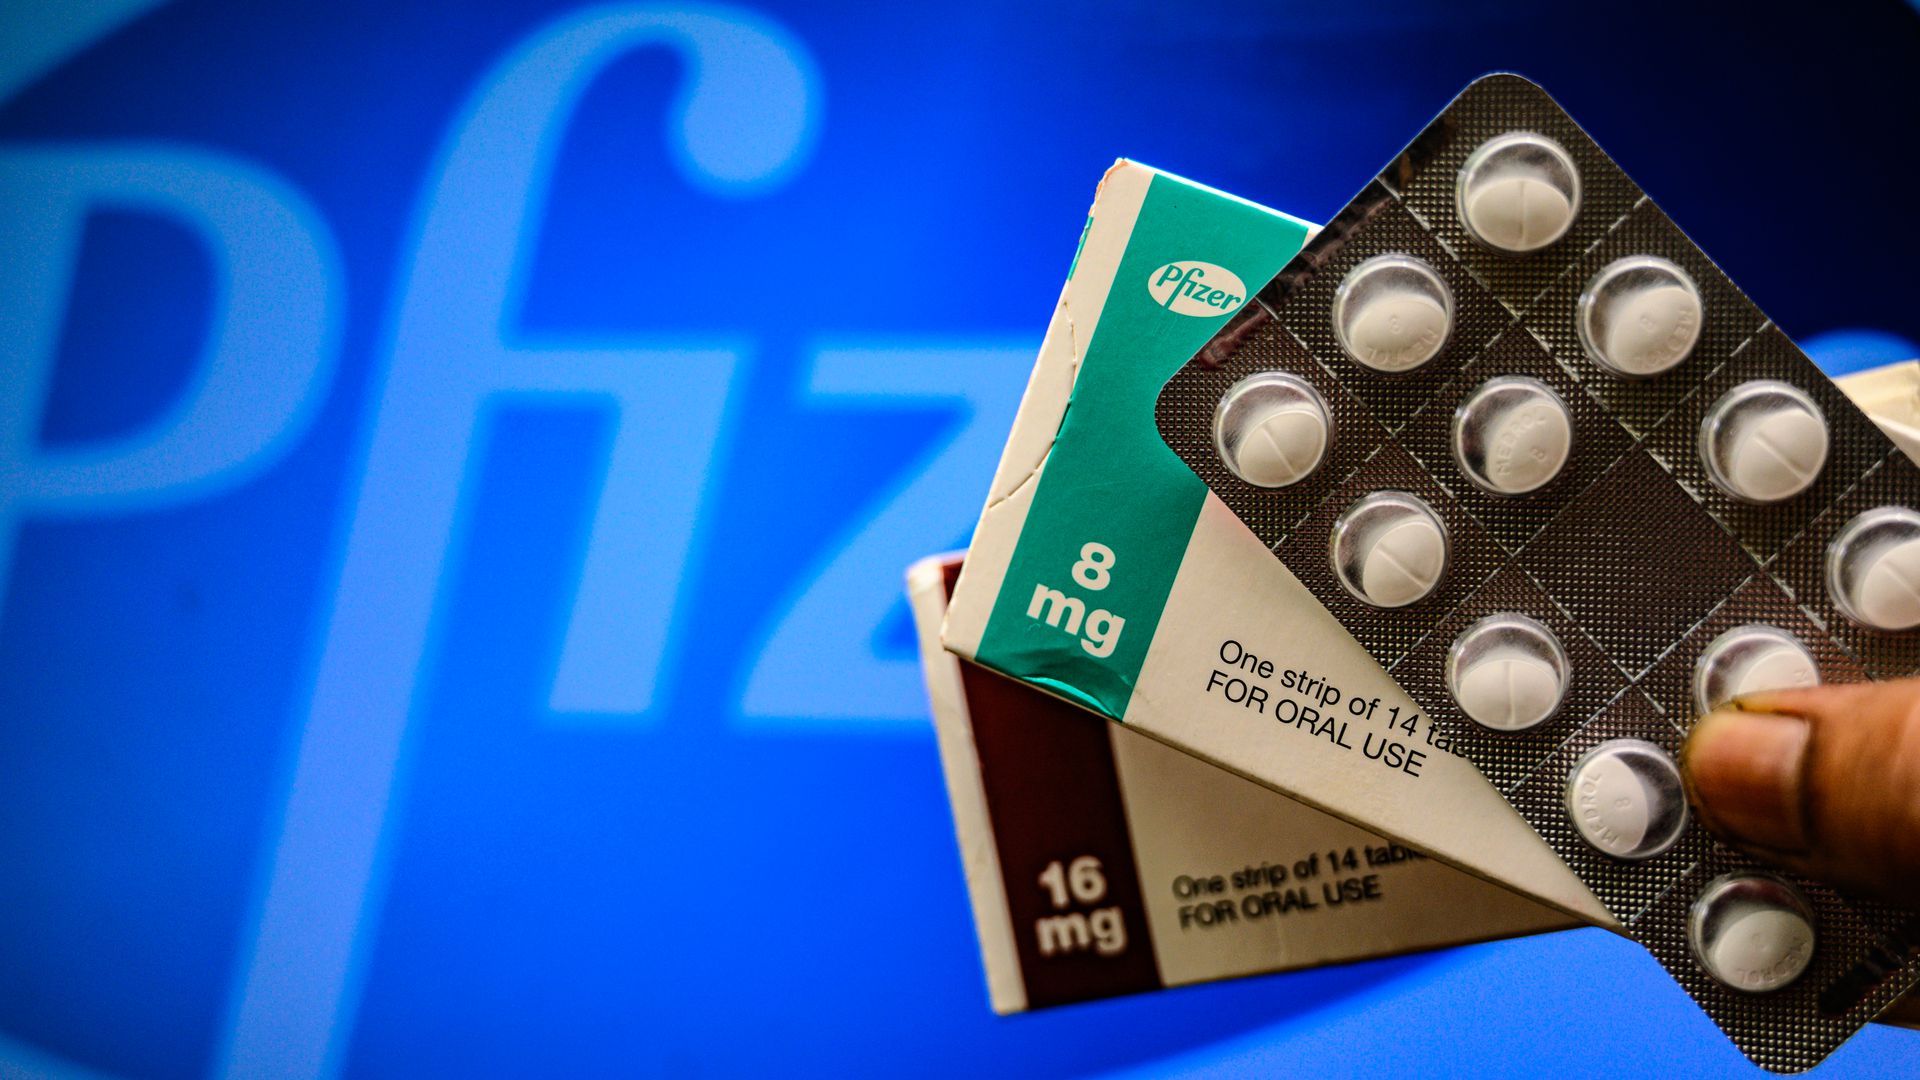 A person's had clutching Pfizer's oral antiviral pills